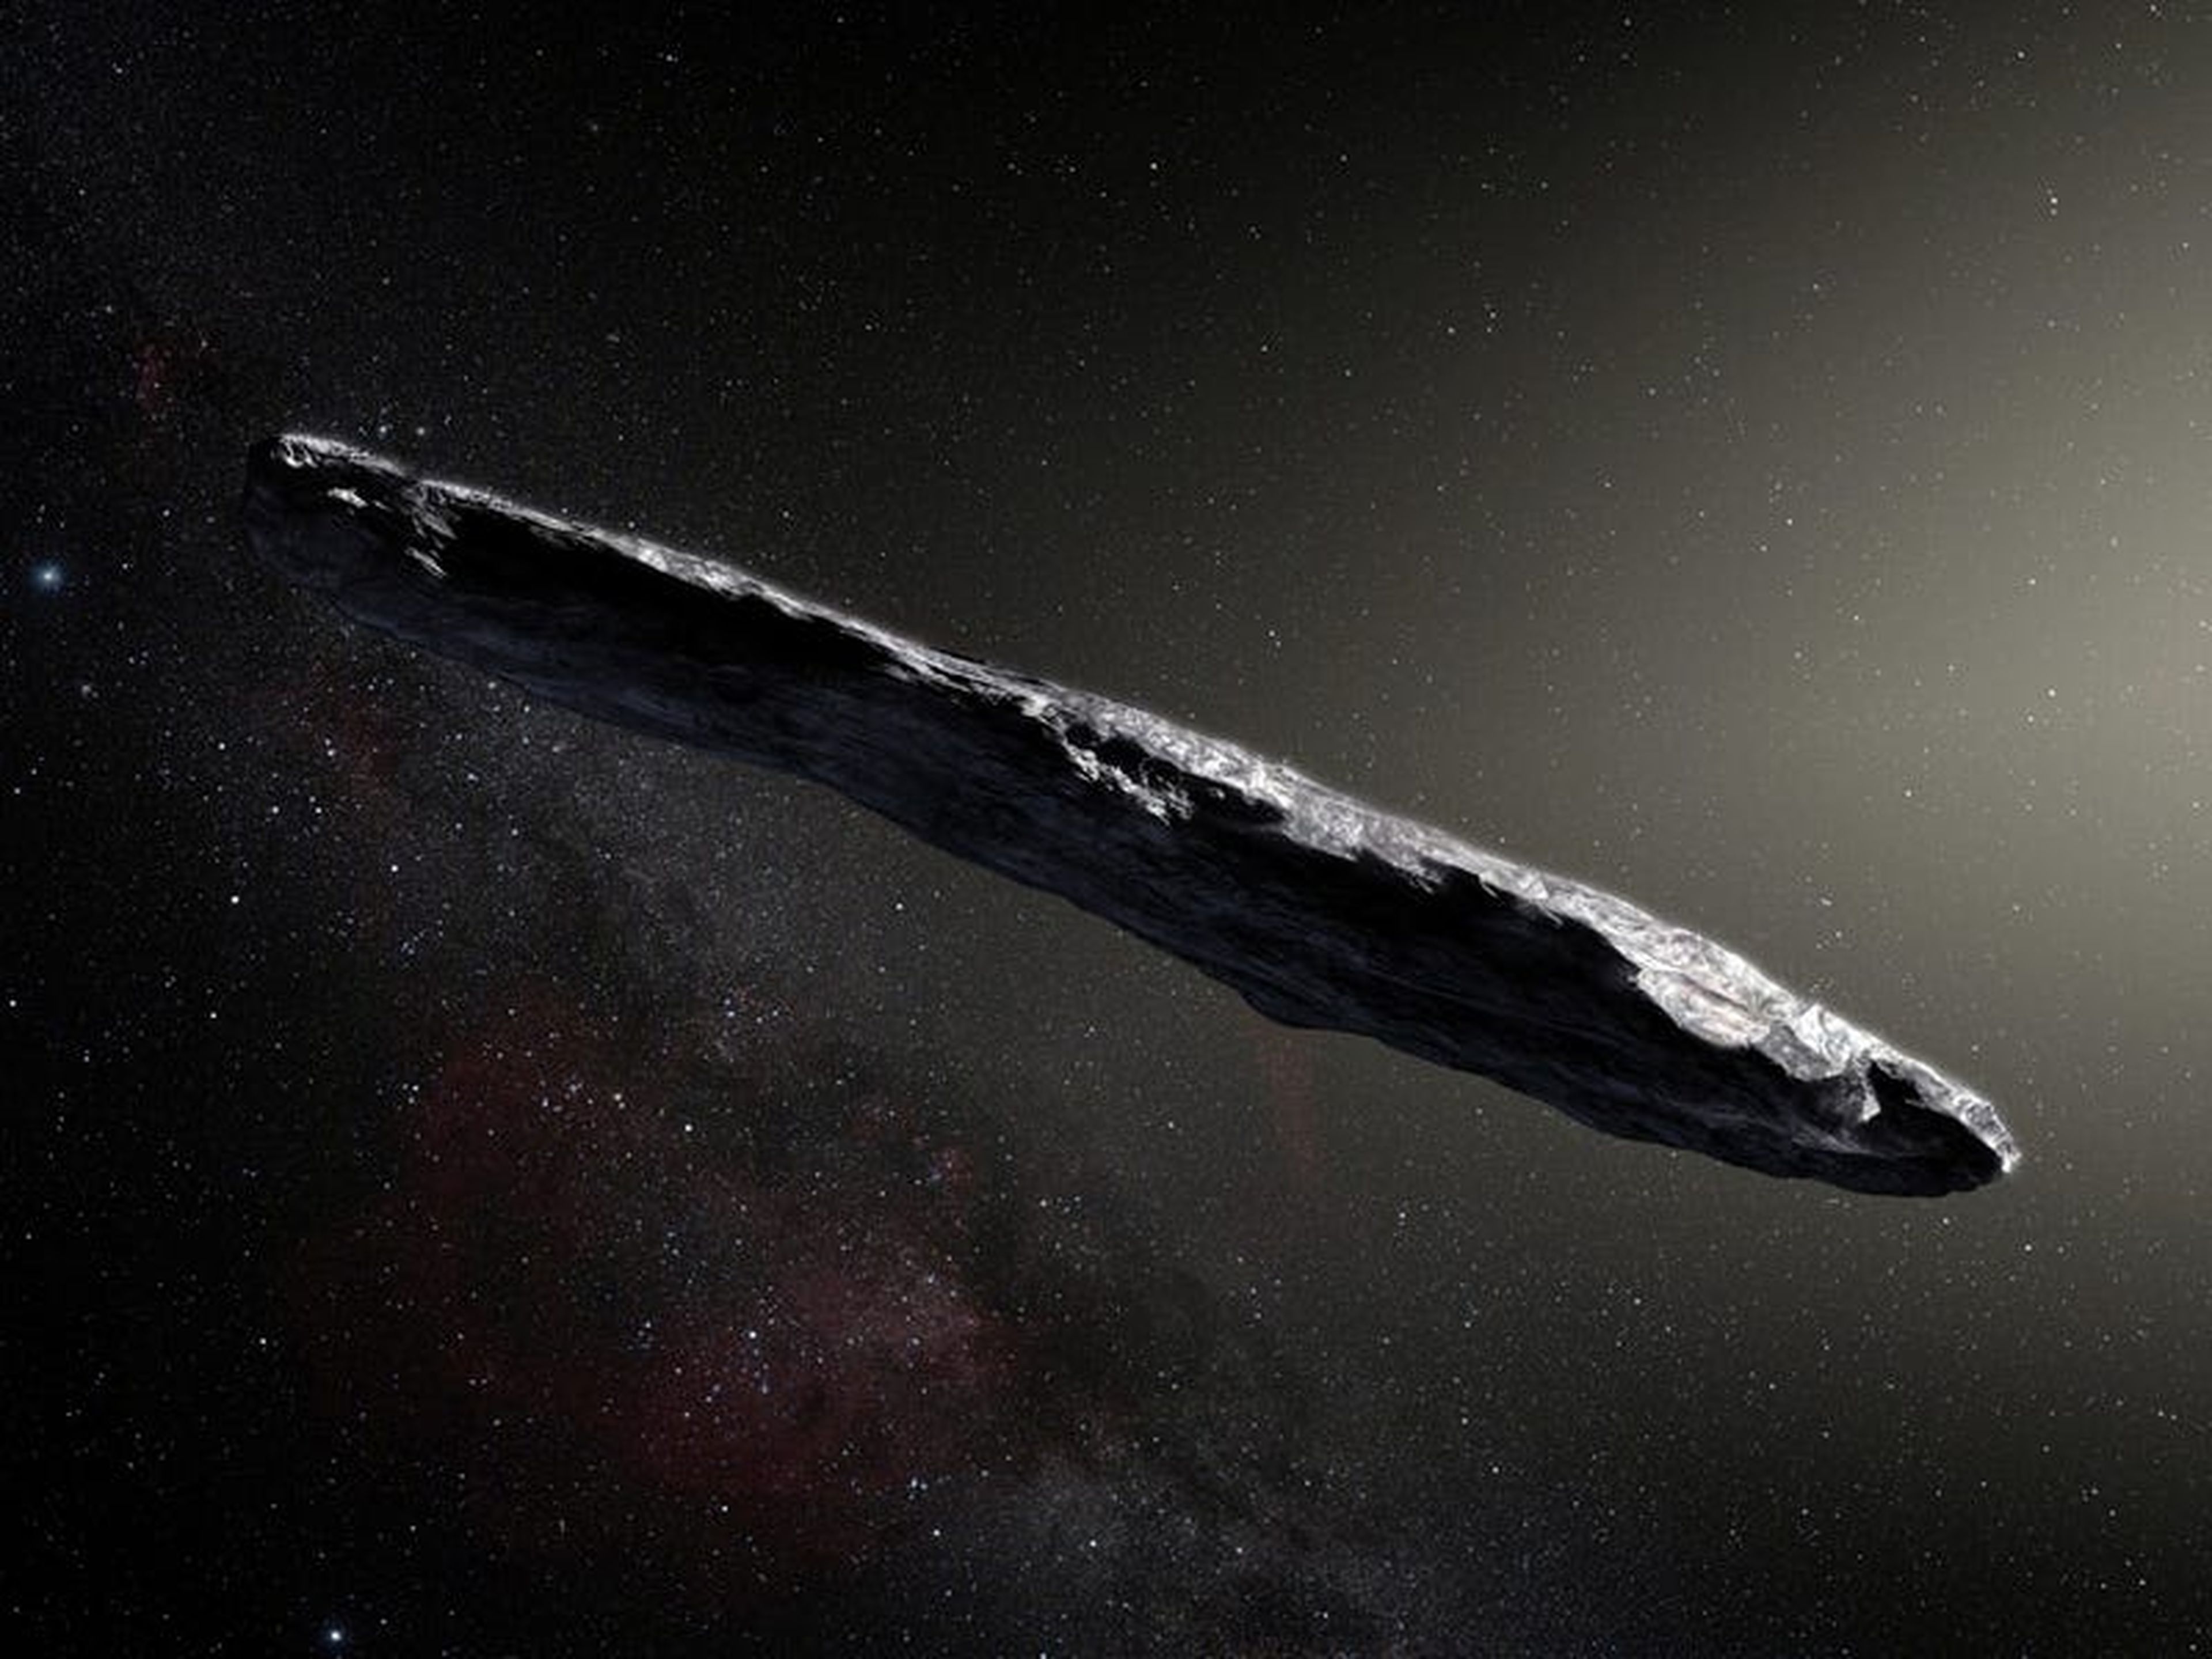 An artist's impression of the first-known interstellar object to visit the solar system, "Oumuamua."